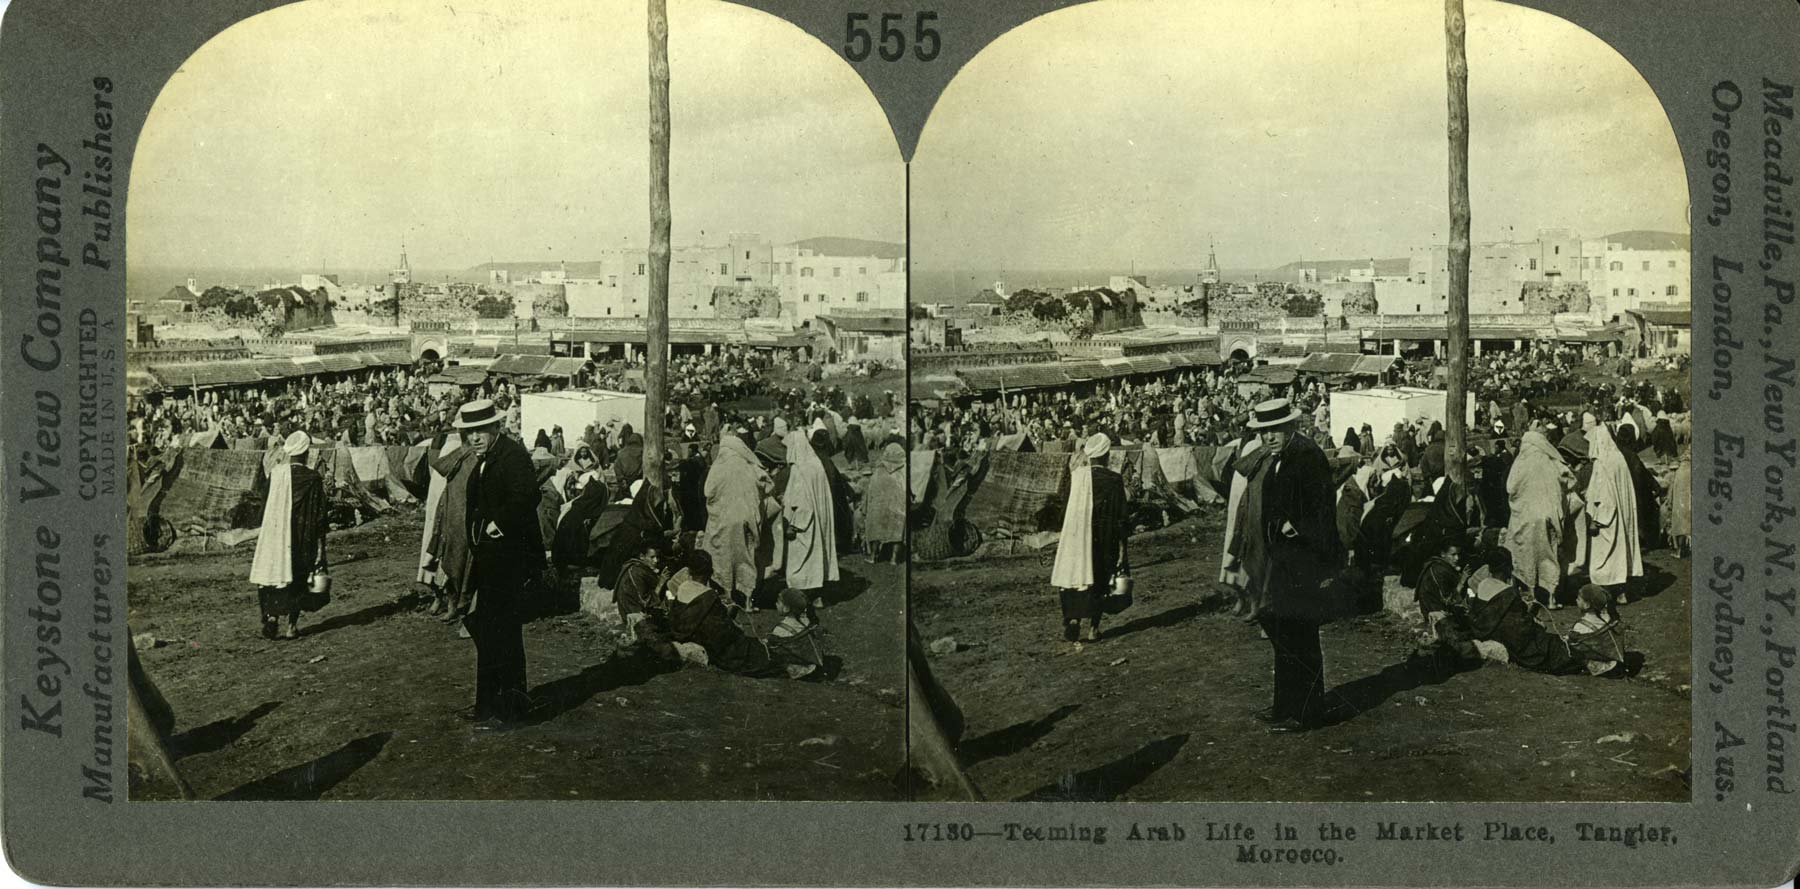 Front, "Teaming Arab Life in the Market Place, Tangier, Morocco"